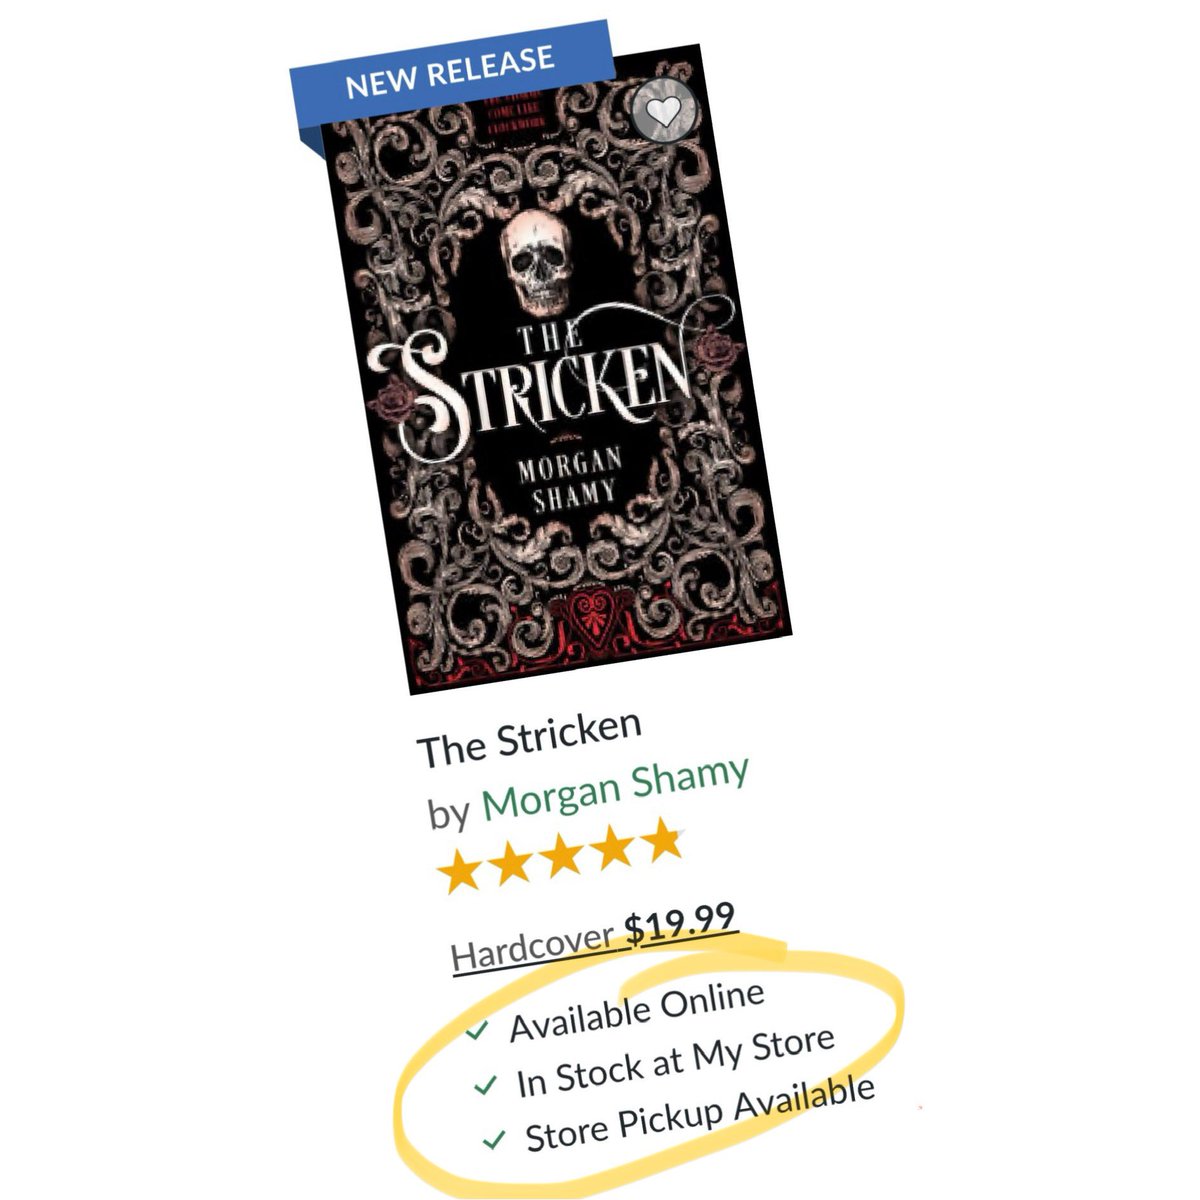 The Stricken is available in some physical Barnes & Noble locations! Check online to see where! Or come see me at my signing THIS Saturday at the Midvale location in Utah!! 💀🖤🔥💀🖤🔥💀🖤🔥